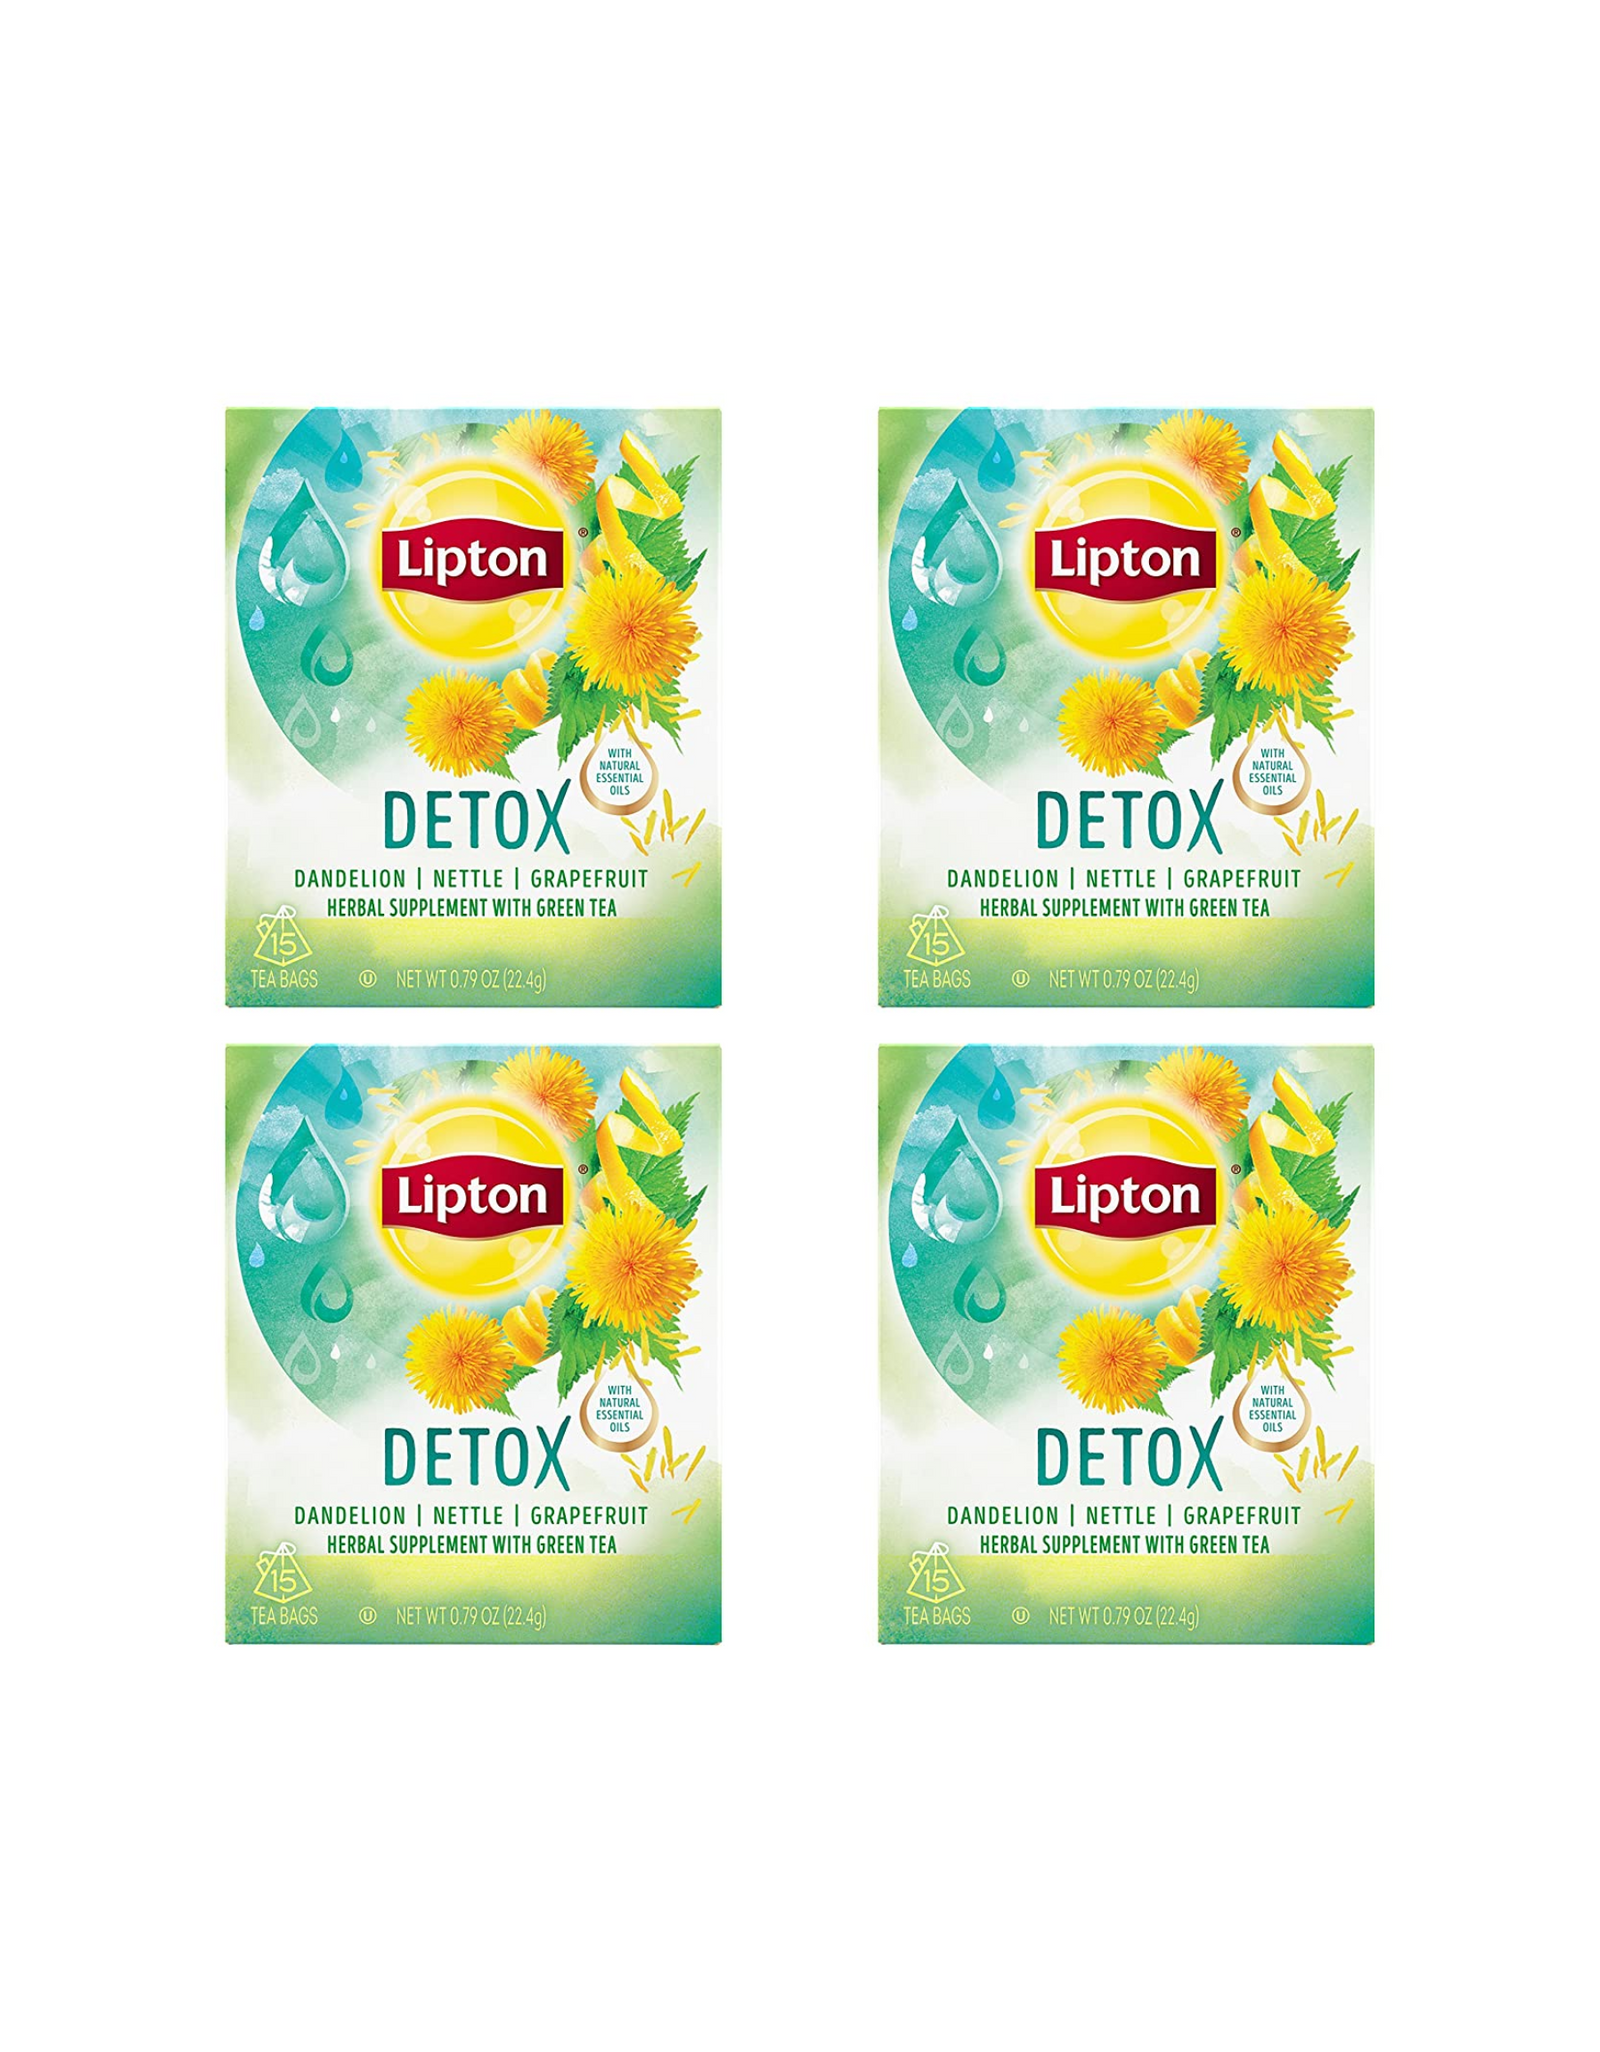 Lipton Herbal Supplement with Green Tea Detox and Natural Essential Oil, 15 ct (Pack of 4)